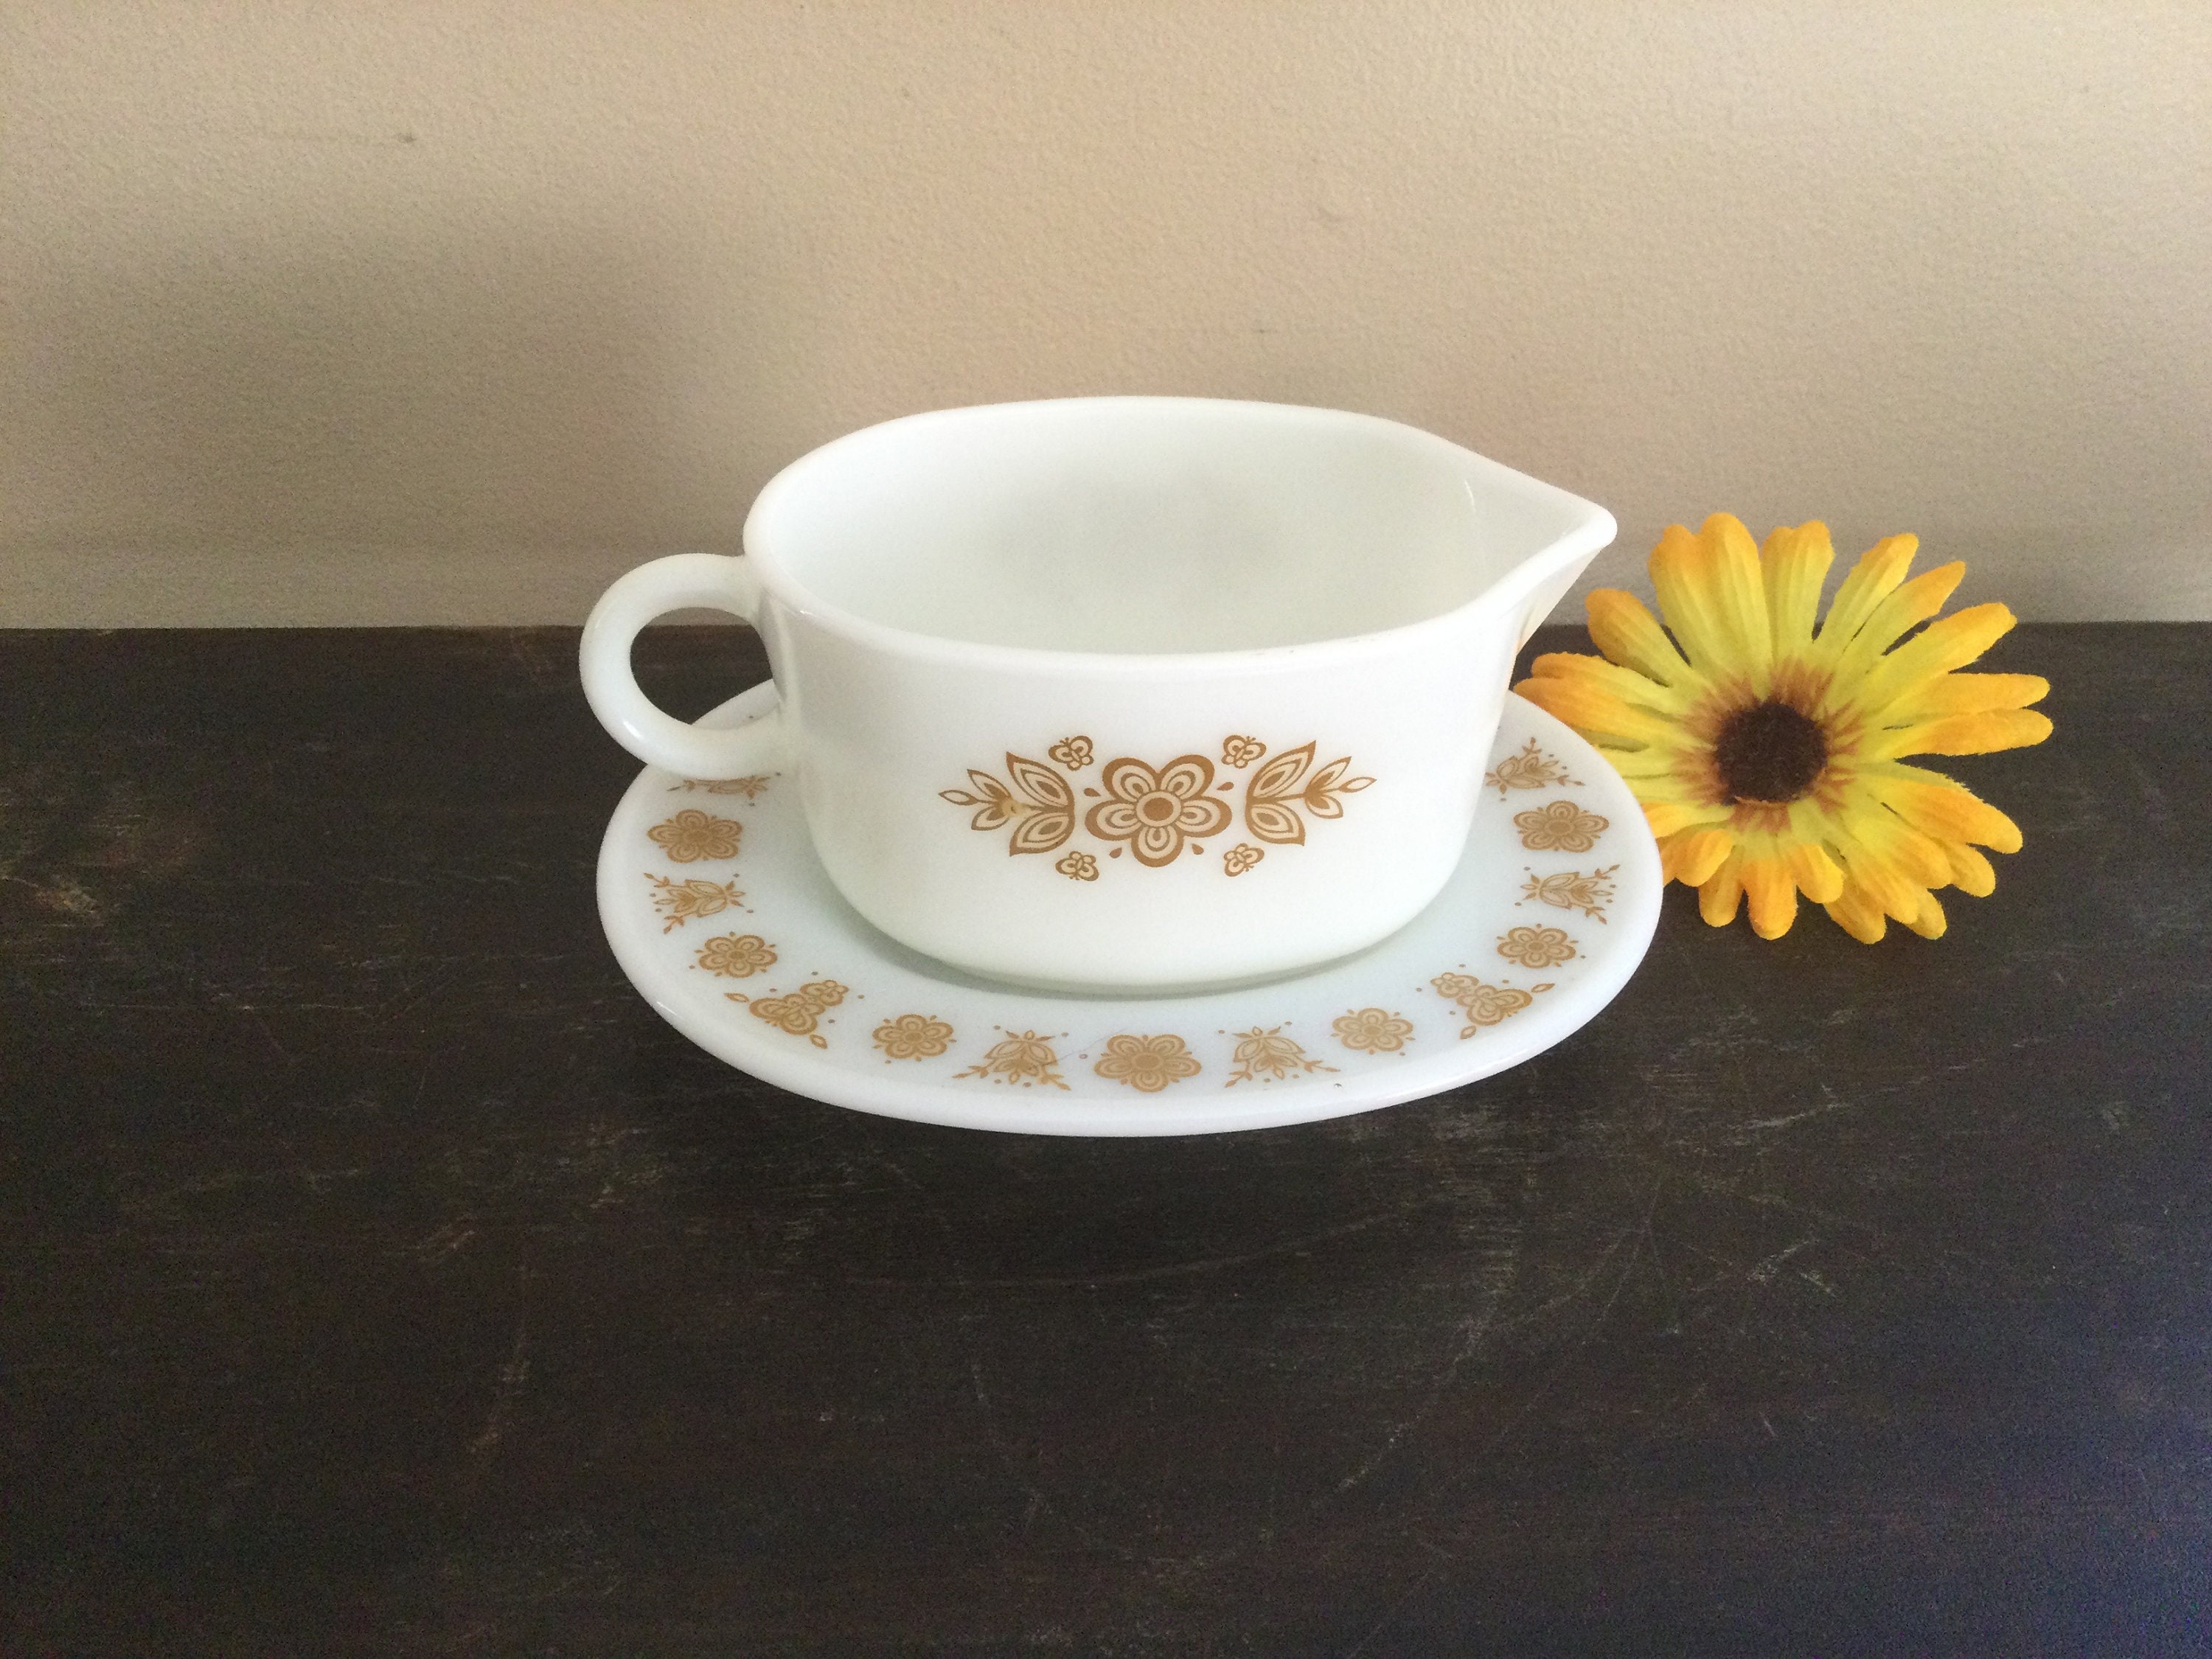 Vintage Corelle Butterfly Gold Salt Pepper Shaker Set by Corning Ware,  White and Yellow Decor